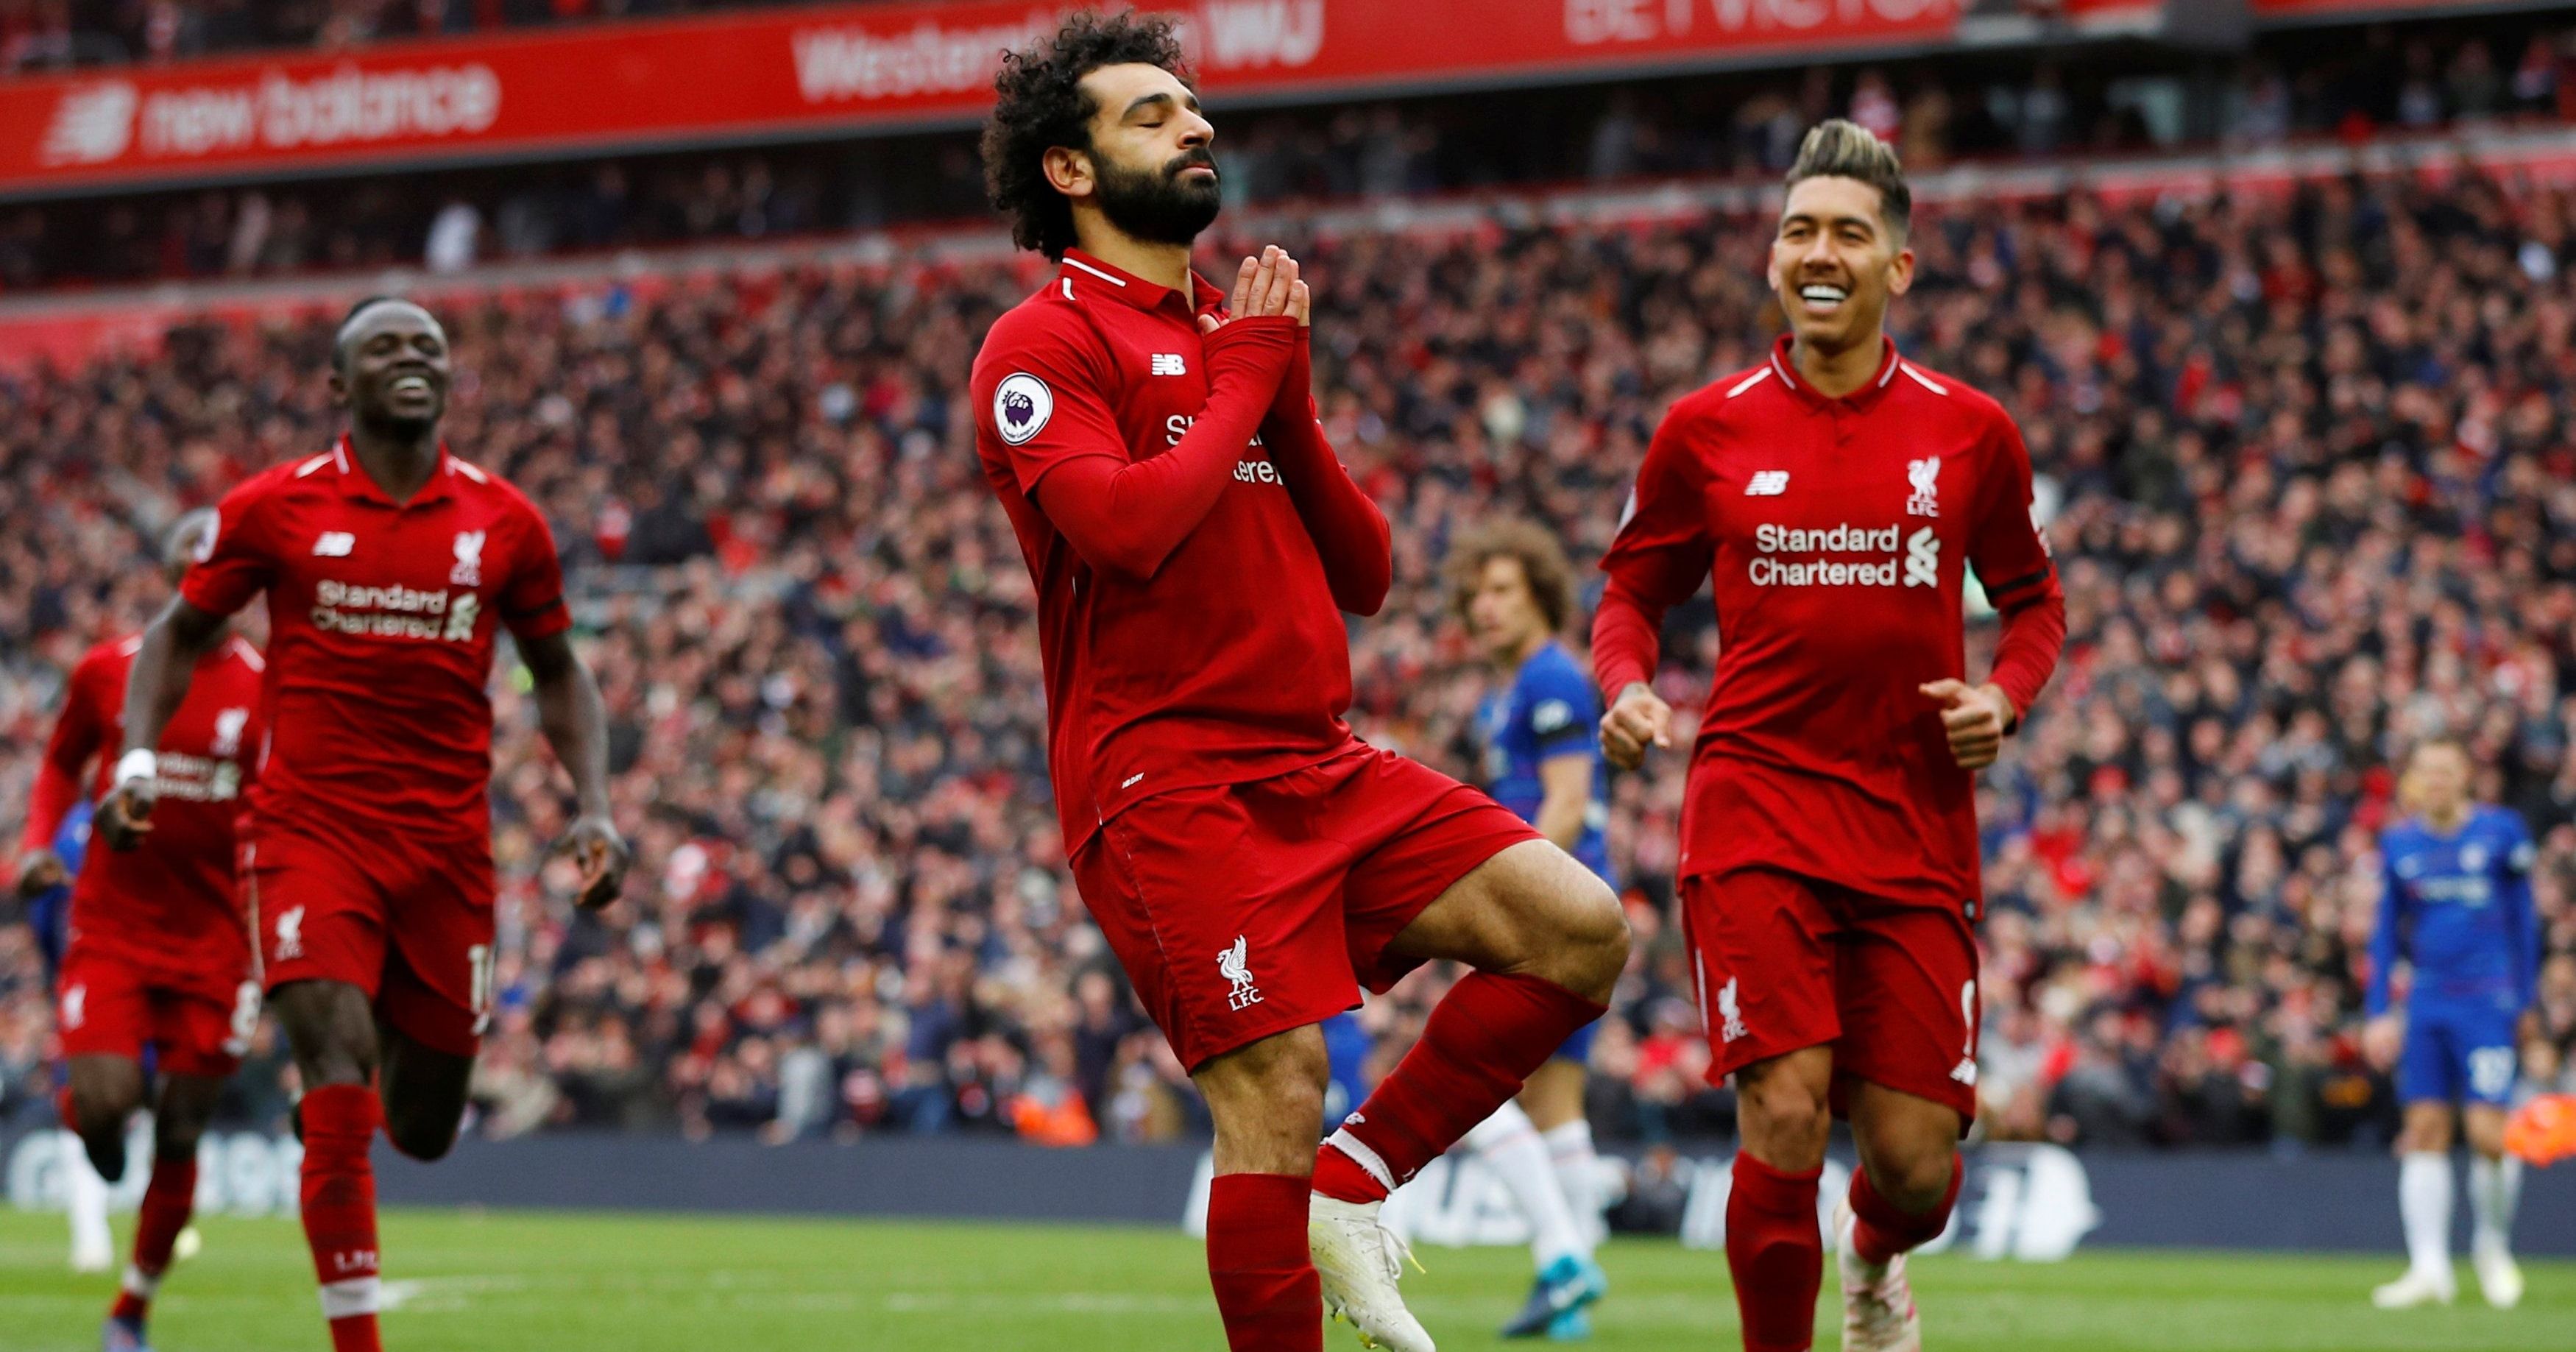 Salah Stunner Against Chelsea Puts Liverpool On Top Of The EPL Table